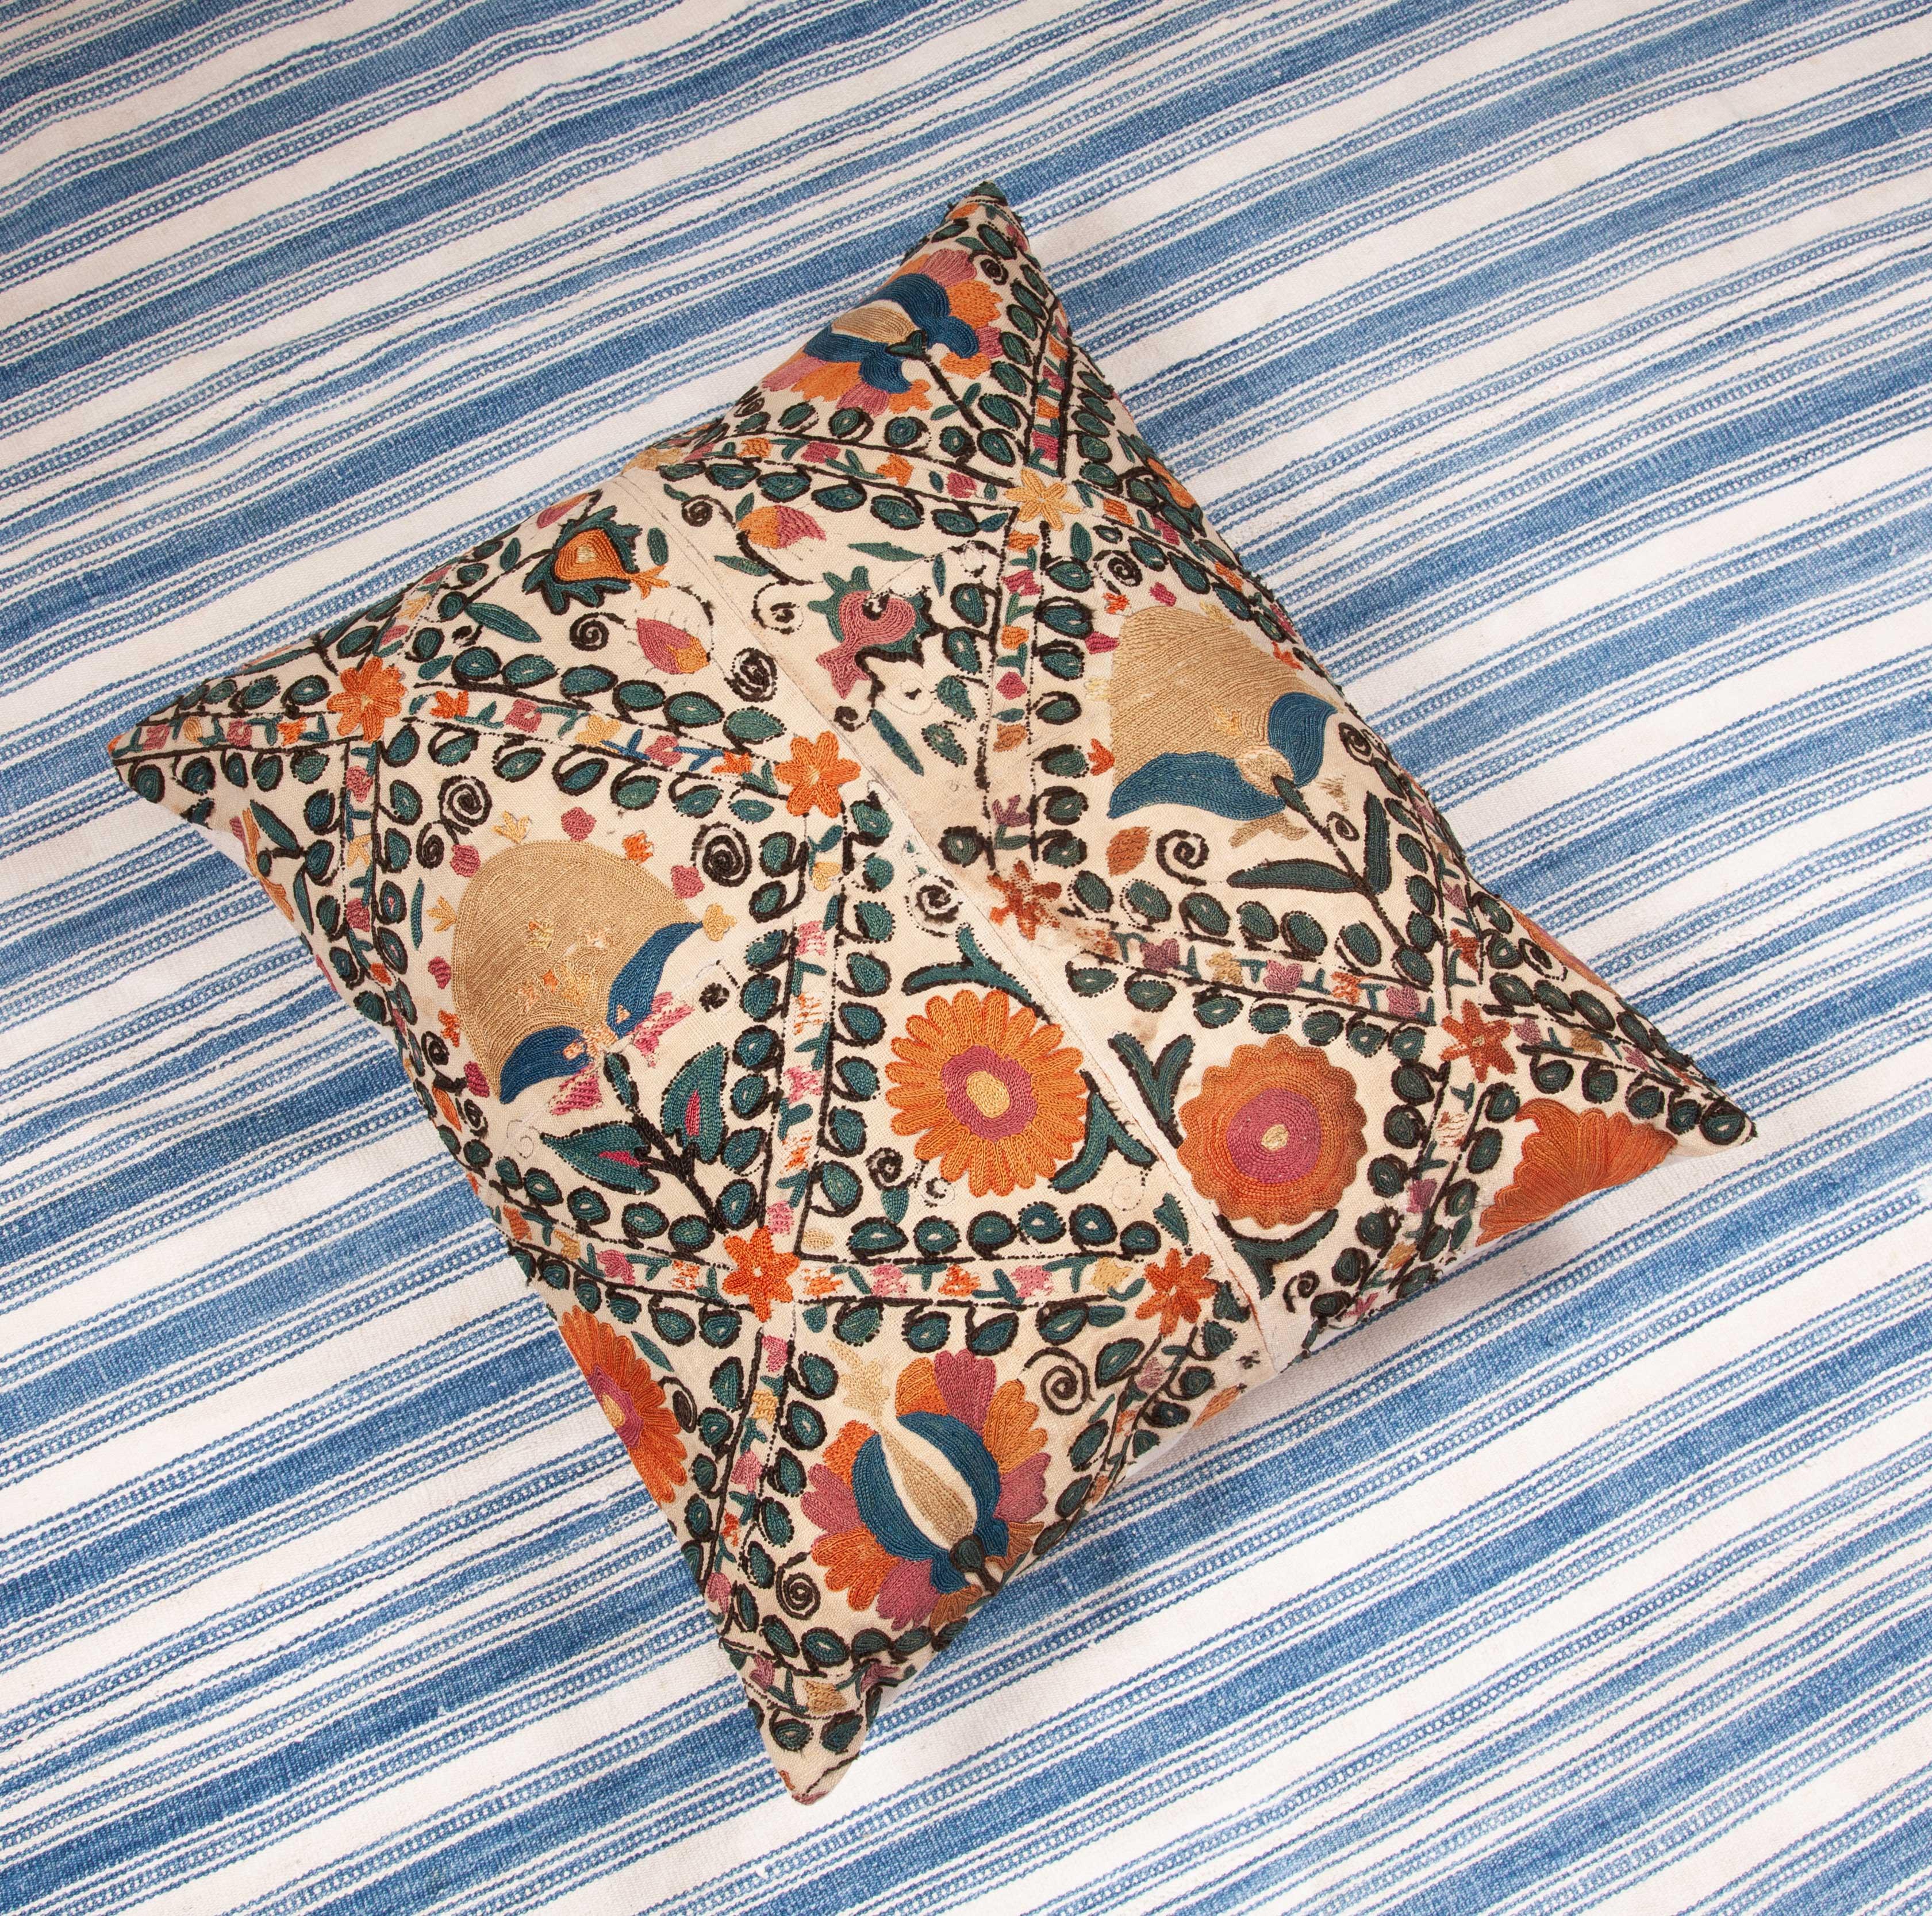 Cotton Antique Suzani Pillow Cases Fashioned from 19th Century Bukhara Suzani Fragment